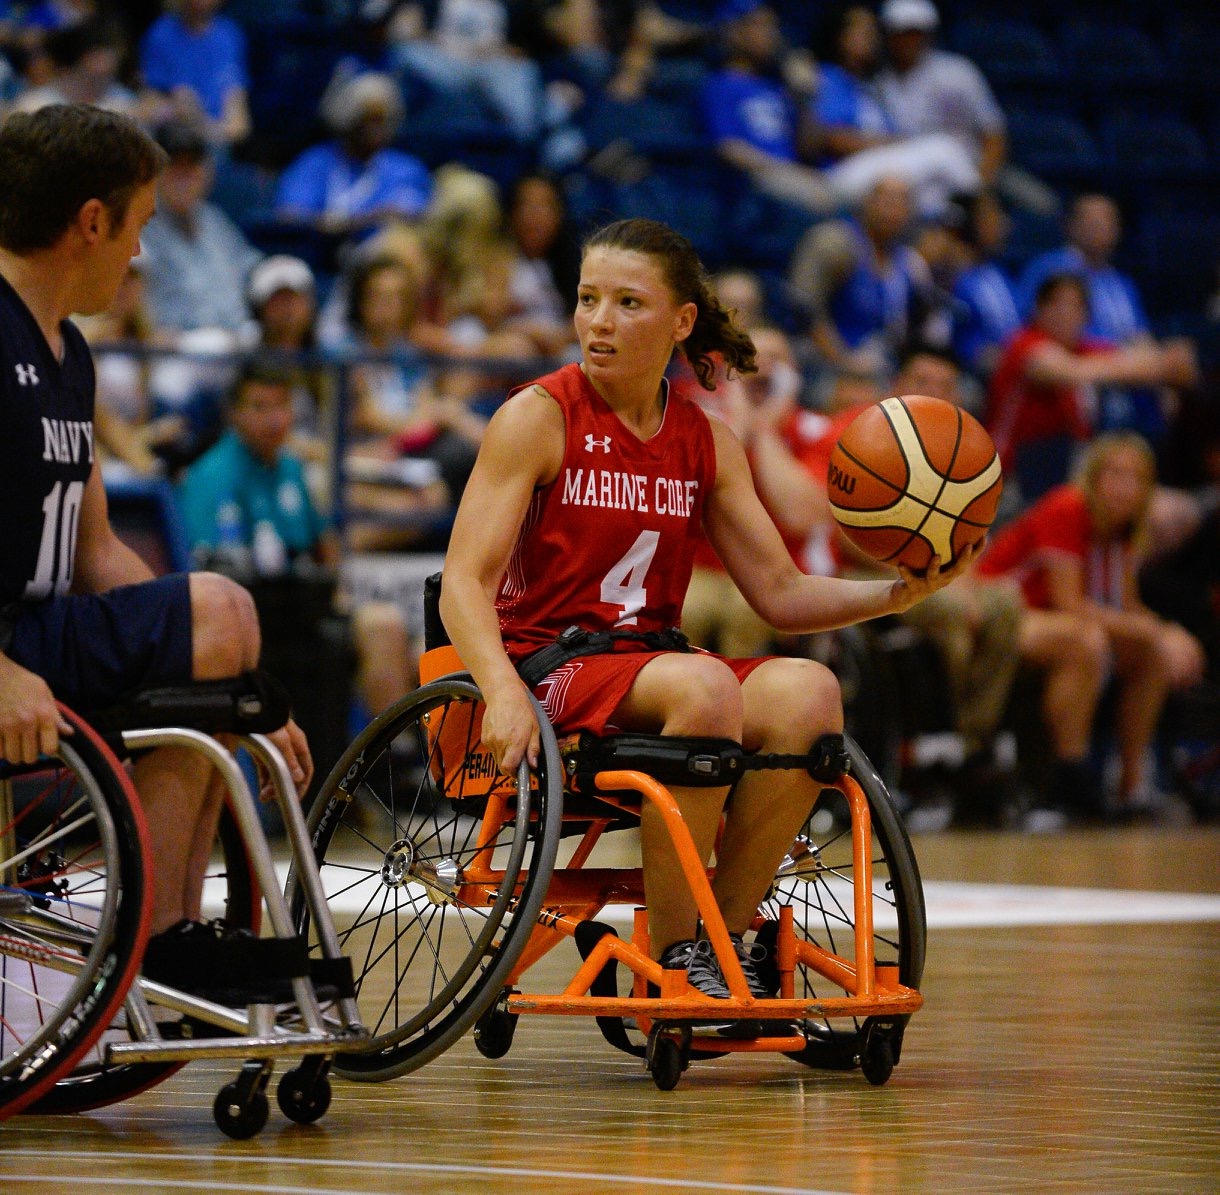 Female athlete looking at male athlete playing wheelchair basketball and holding the basketball